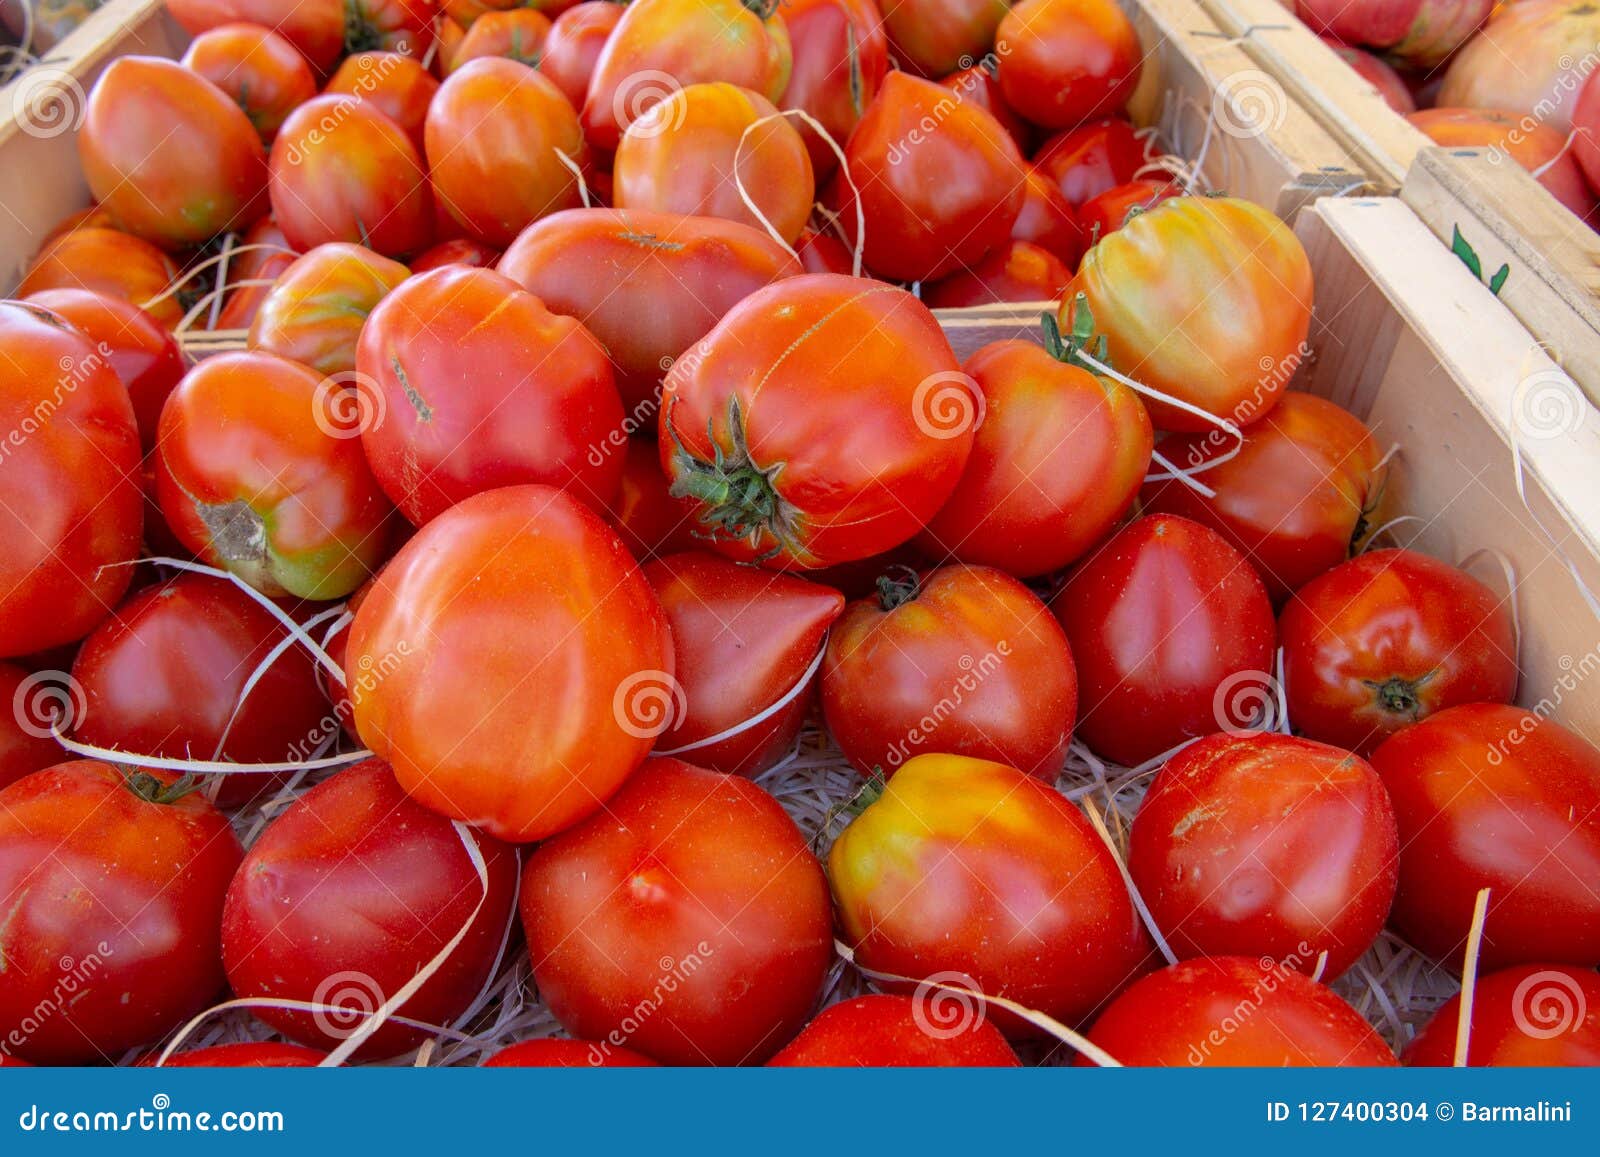 Vegetables of South France, Farmers Organic Ripe Tomatoes in Stock ...